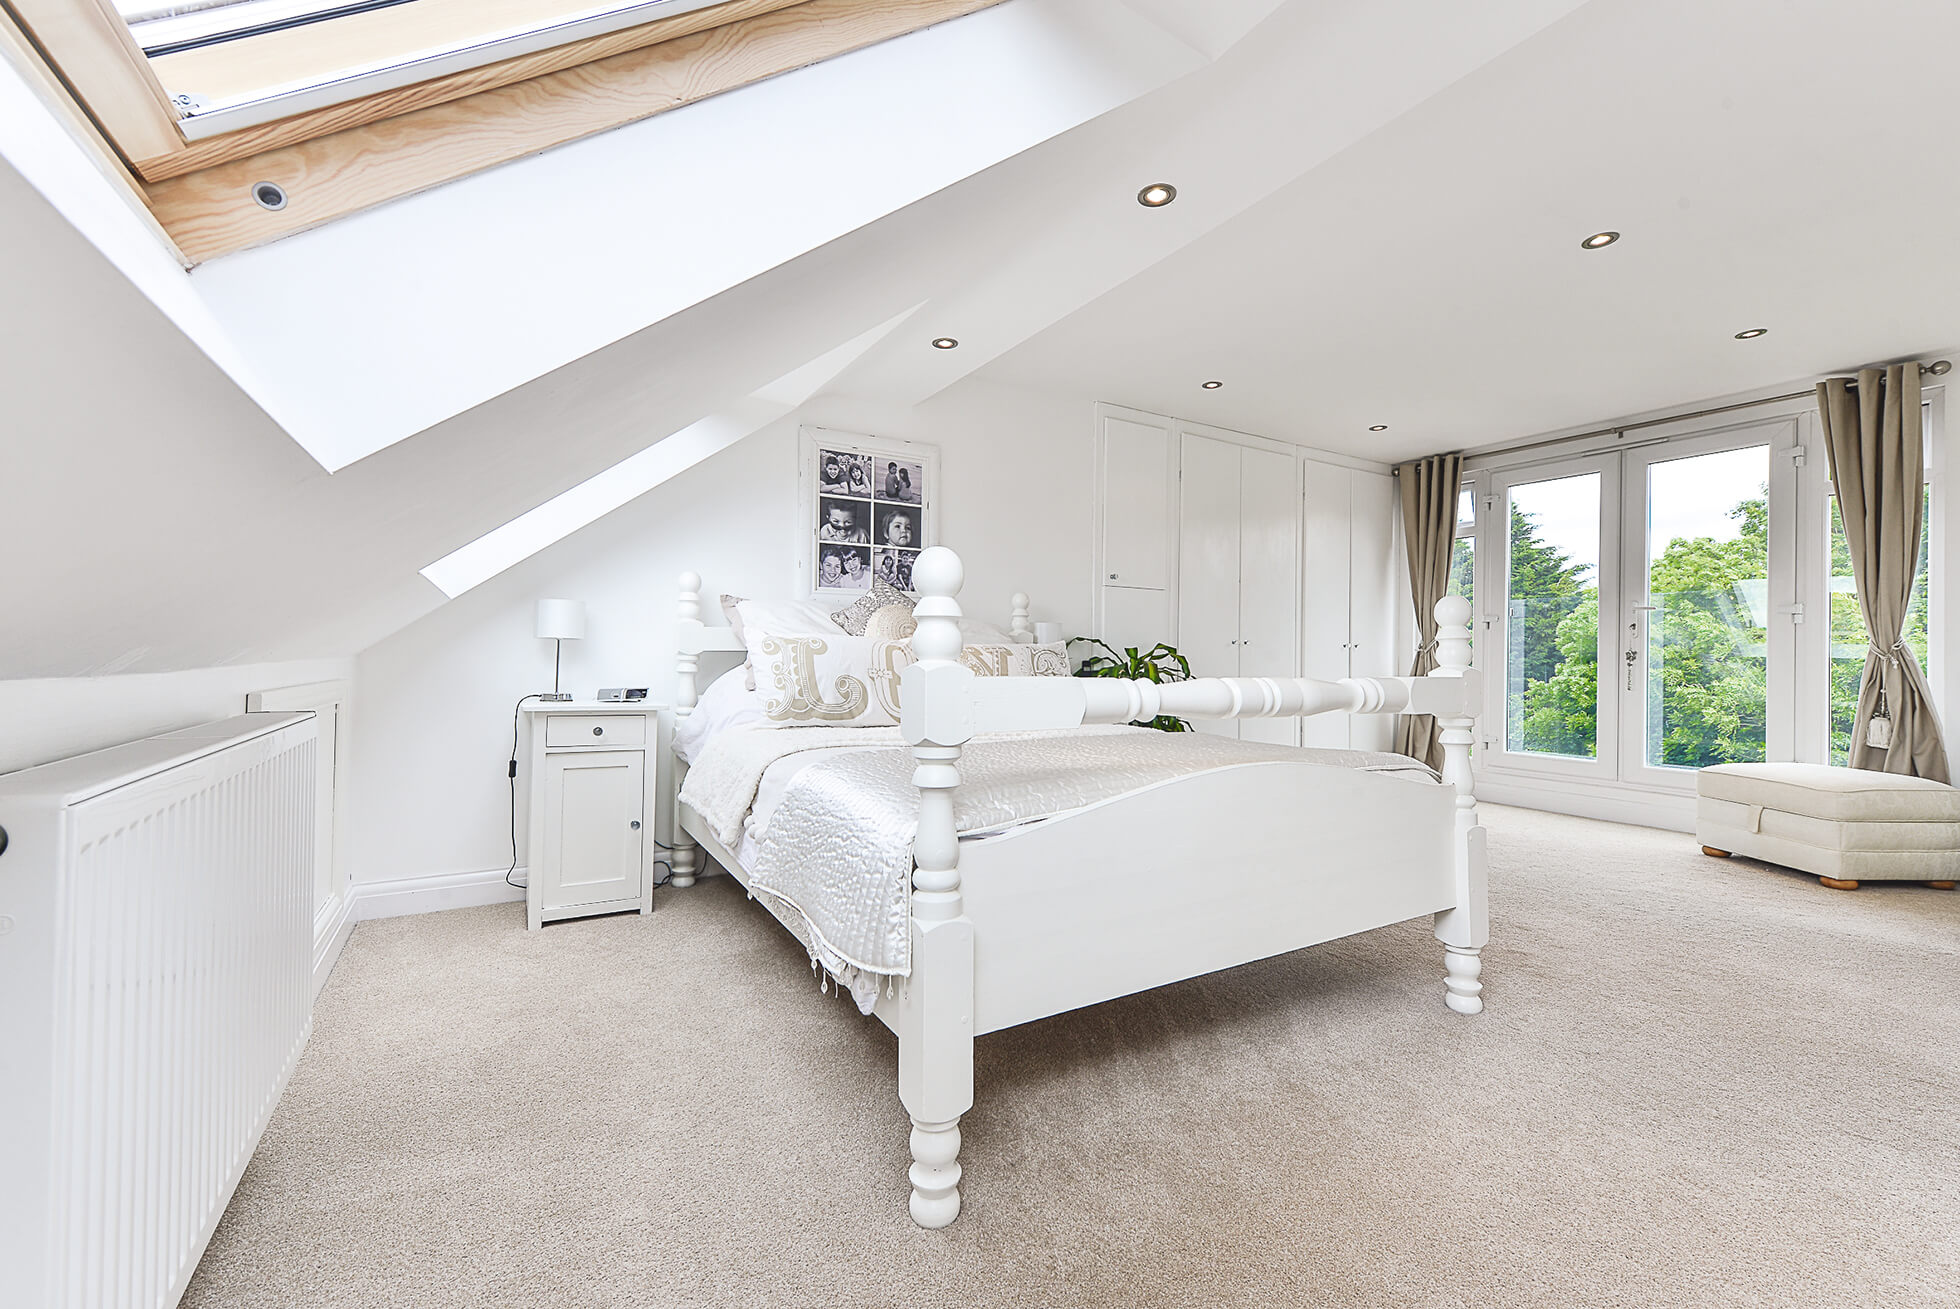 Do you have a question about converting your Loft in Bygrave? Here are the most popular questions asked by our clients.